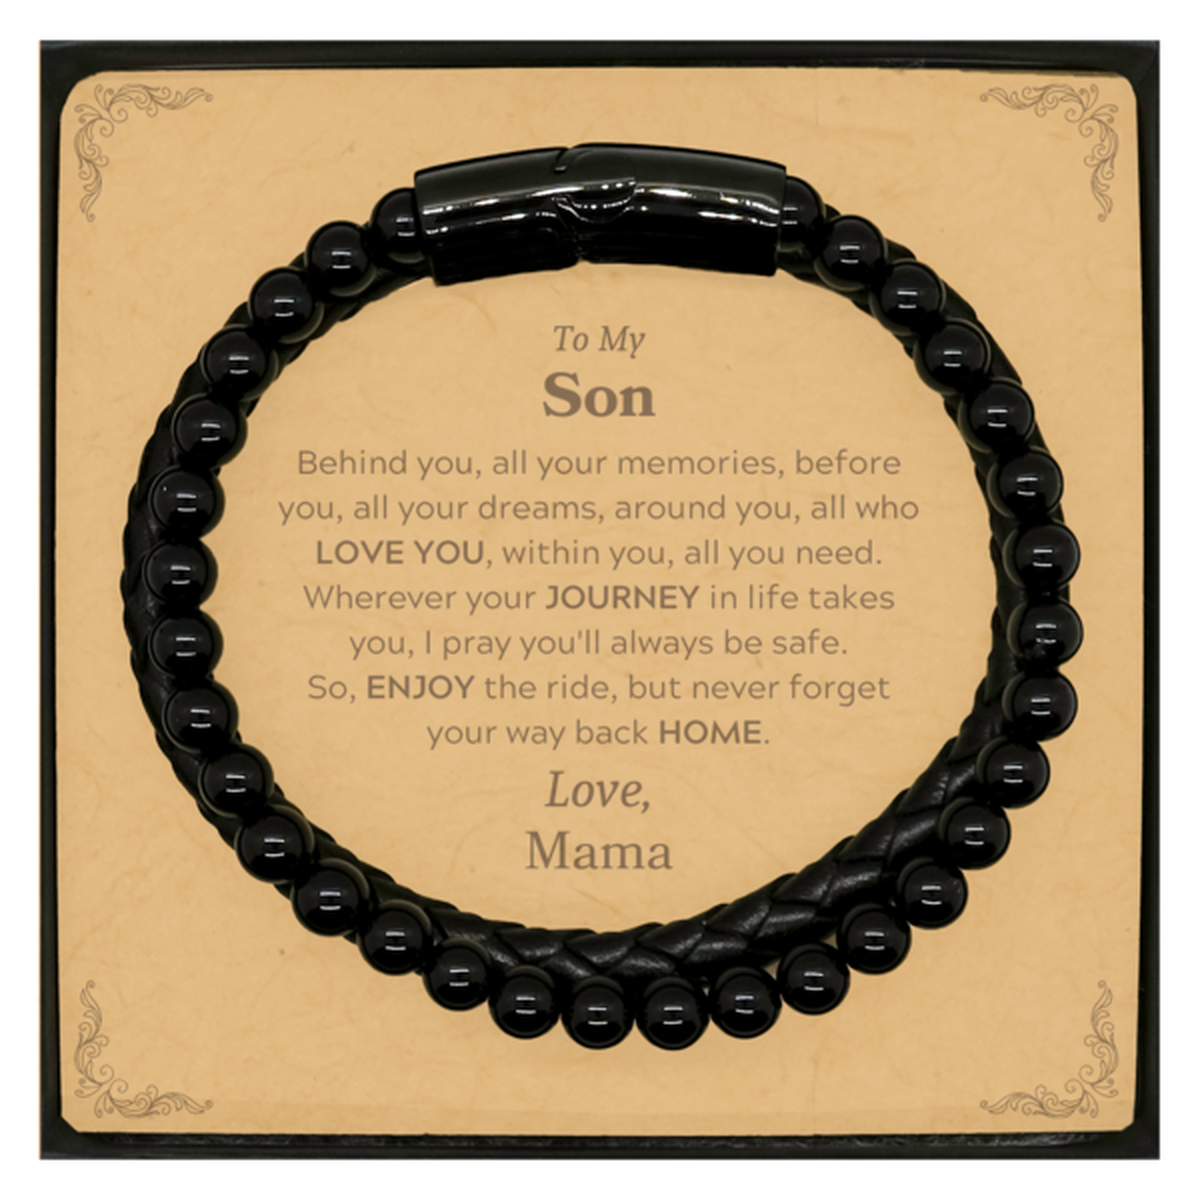 To My Son Graduation Gifts from Mama, Son Stone Leather Bracelets Christmas Birthday Gifts for Son Behind you, all your memories, before you, all your dreams. Love, Mama